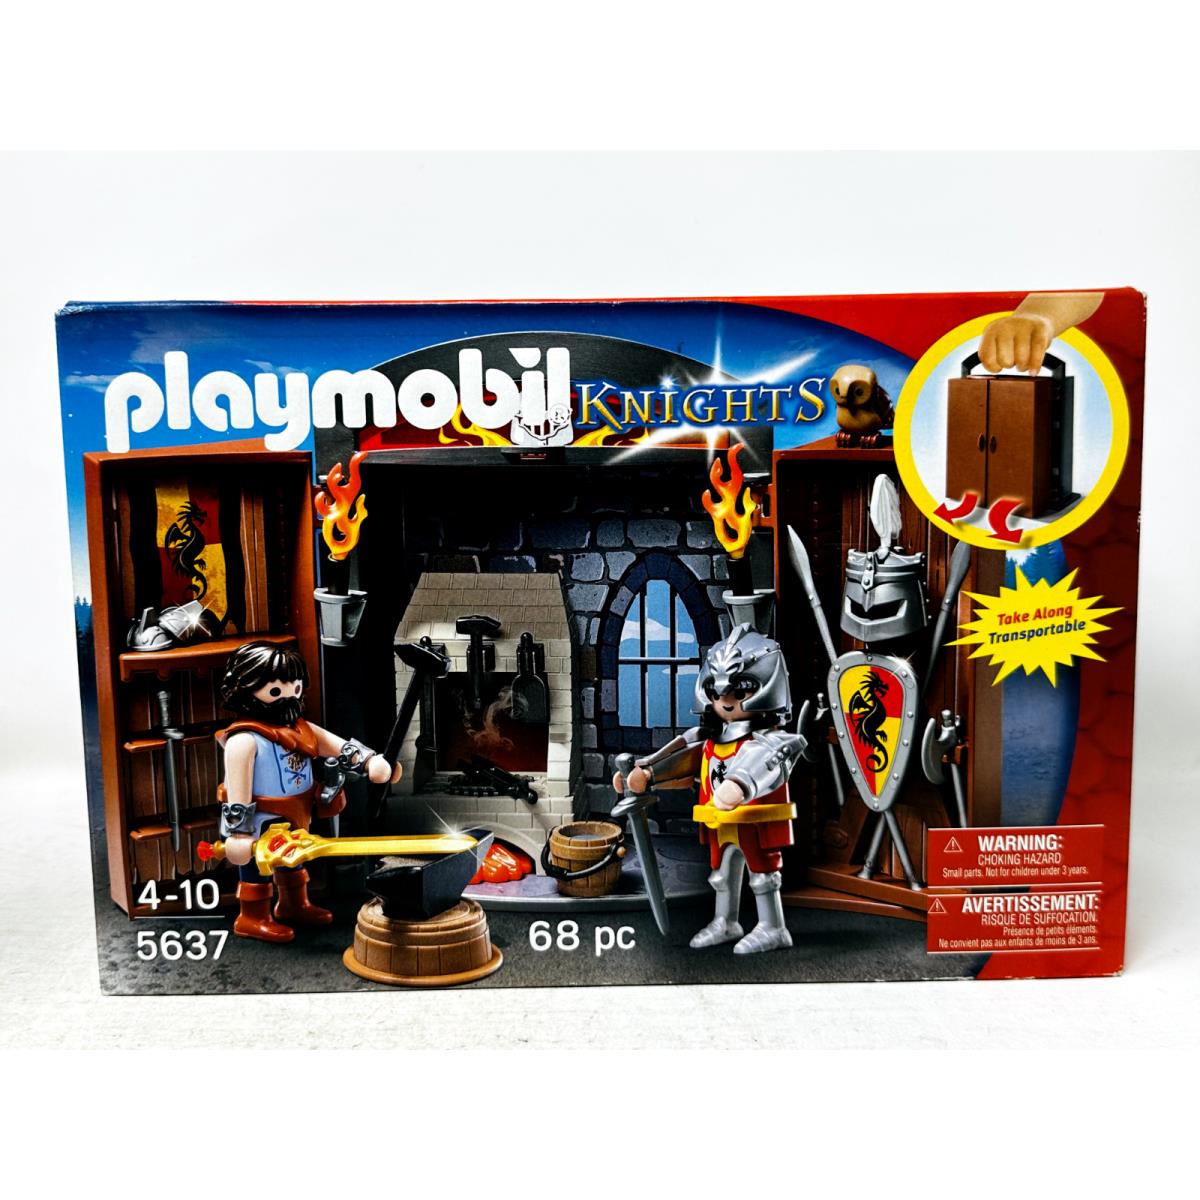 Playmobile Knights 5637 - 68 Pieces